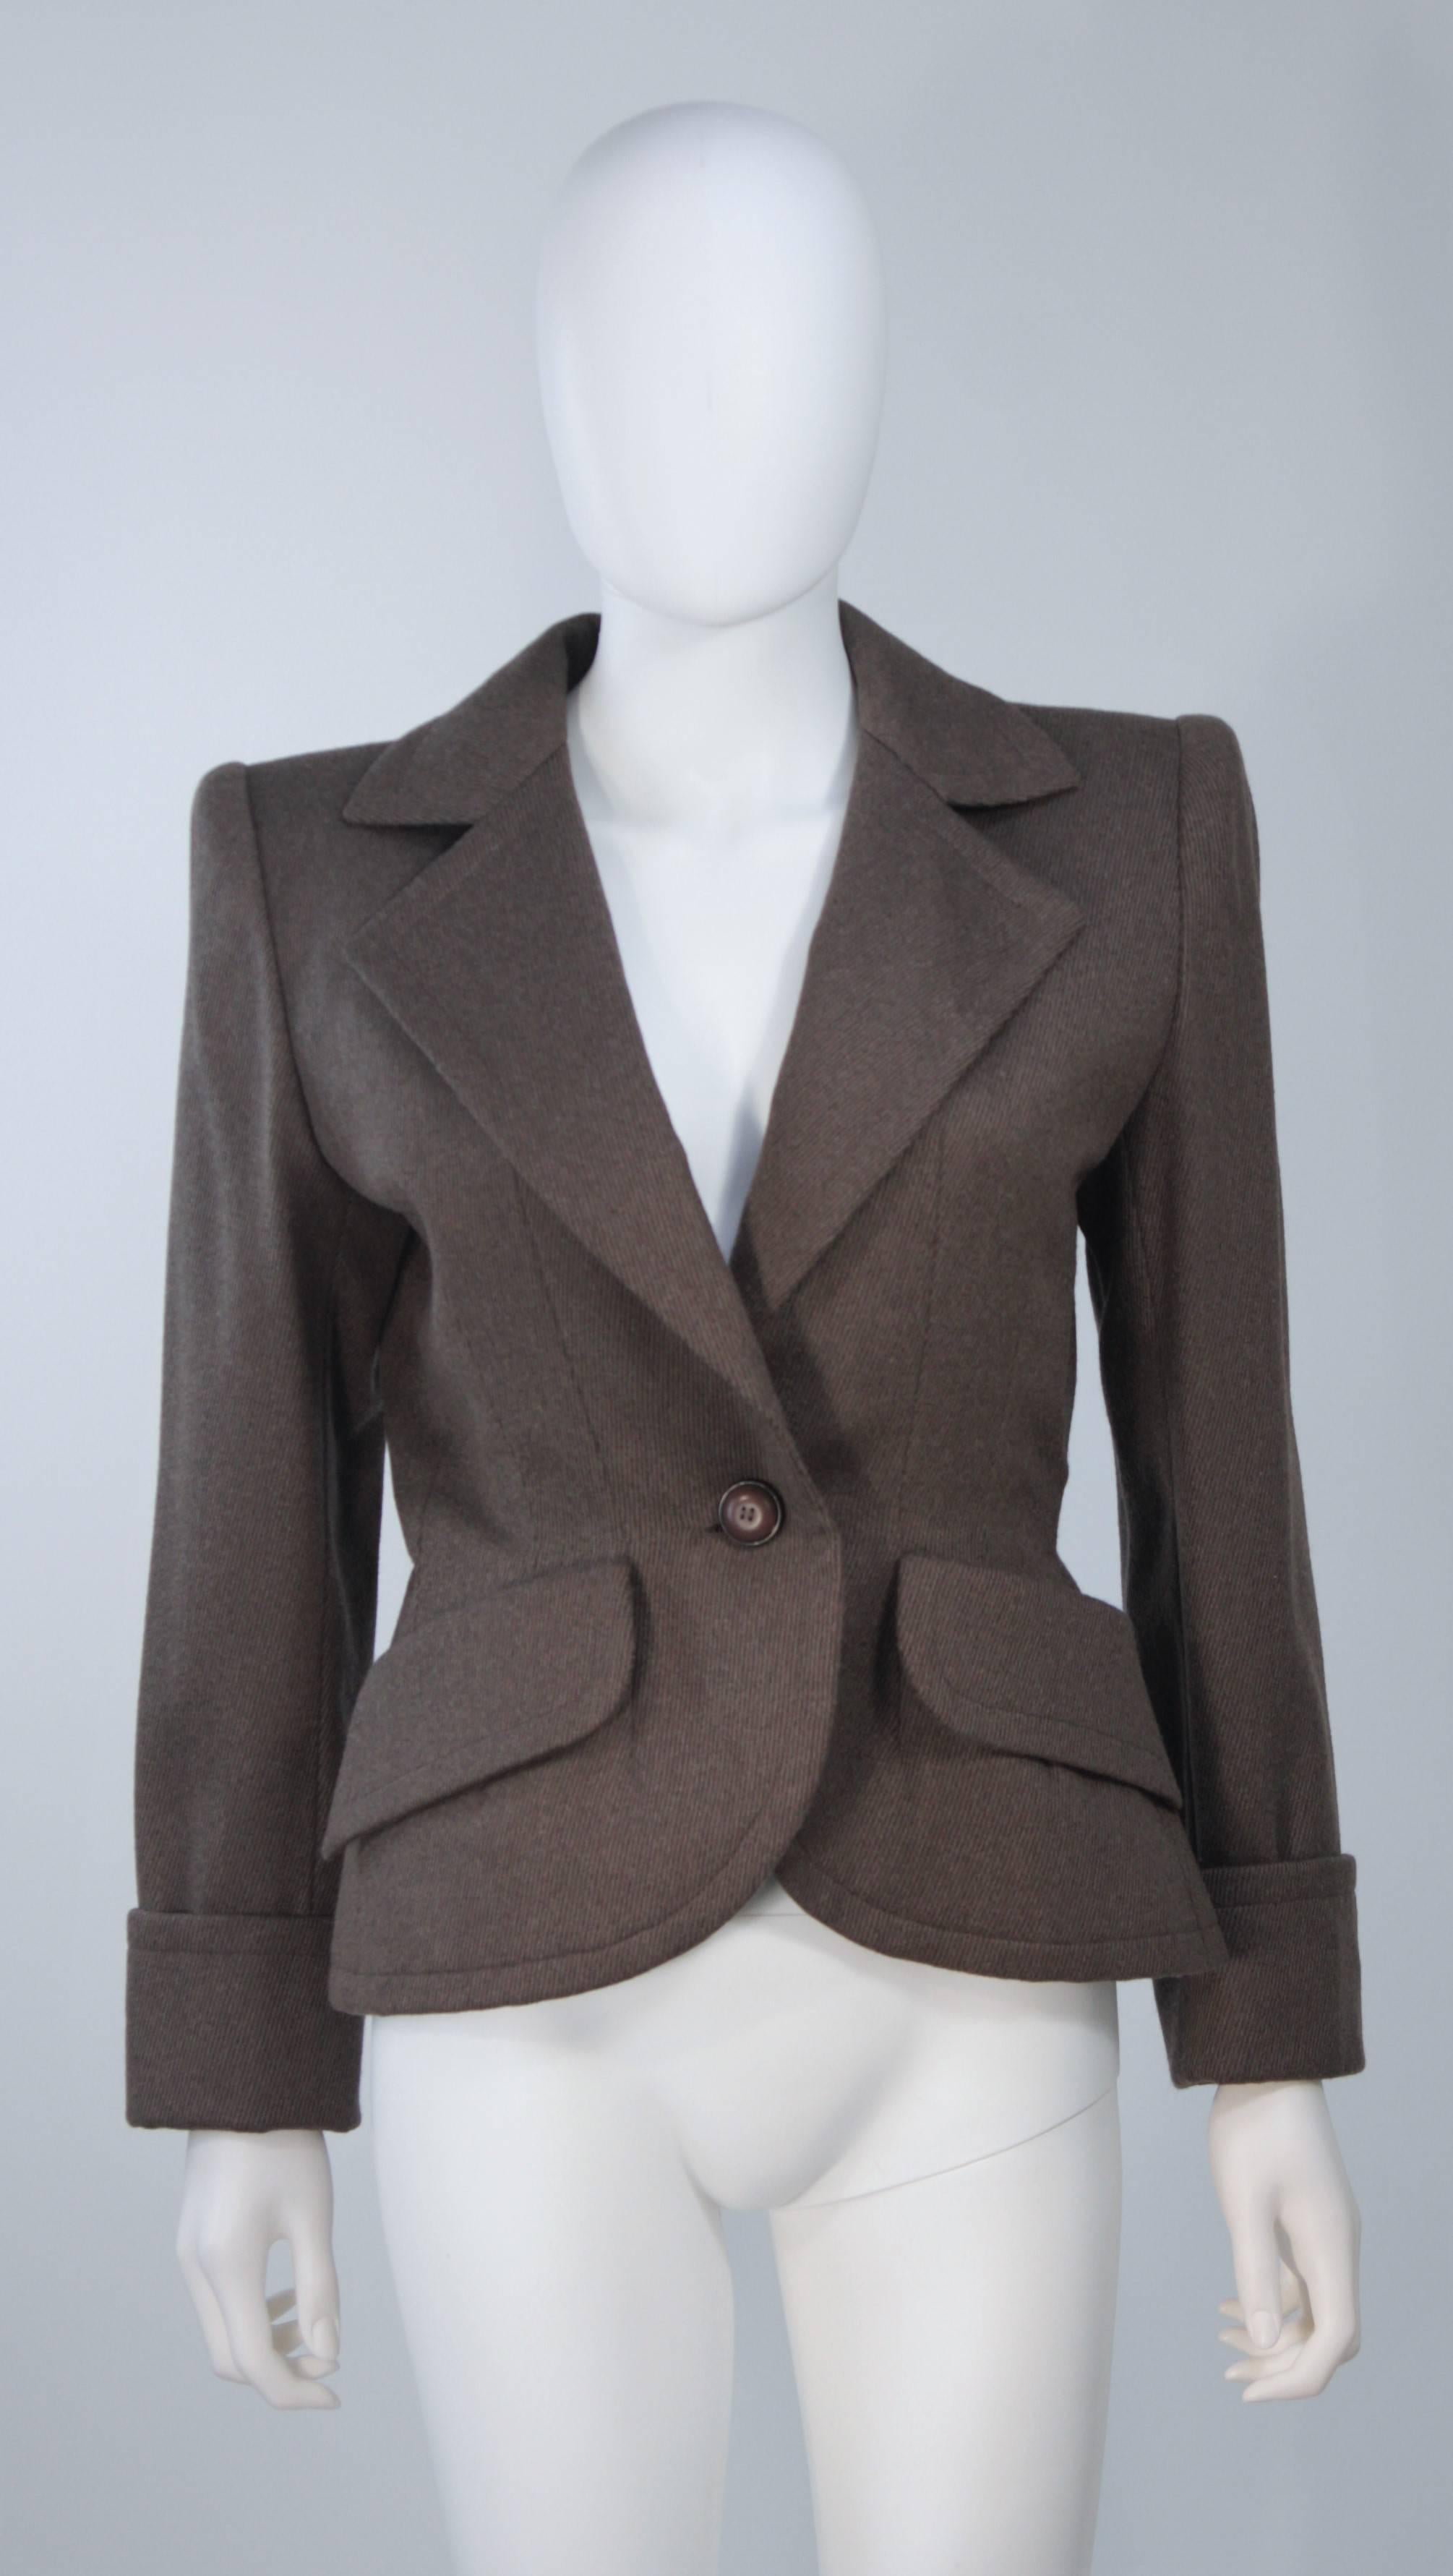 GIVENCHY COUTURE Wool Silk & Snakeskin 4pc Skirt Suit with Belt Size 4-6 1